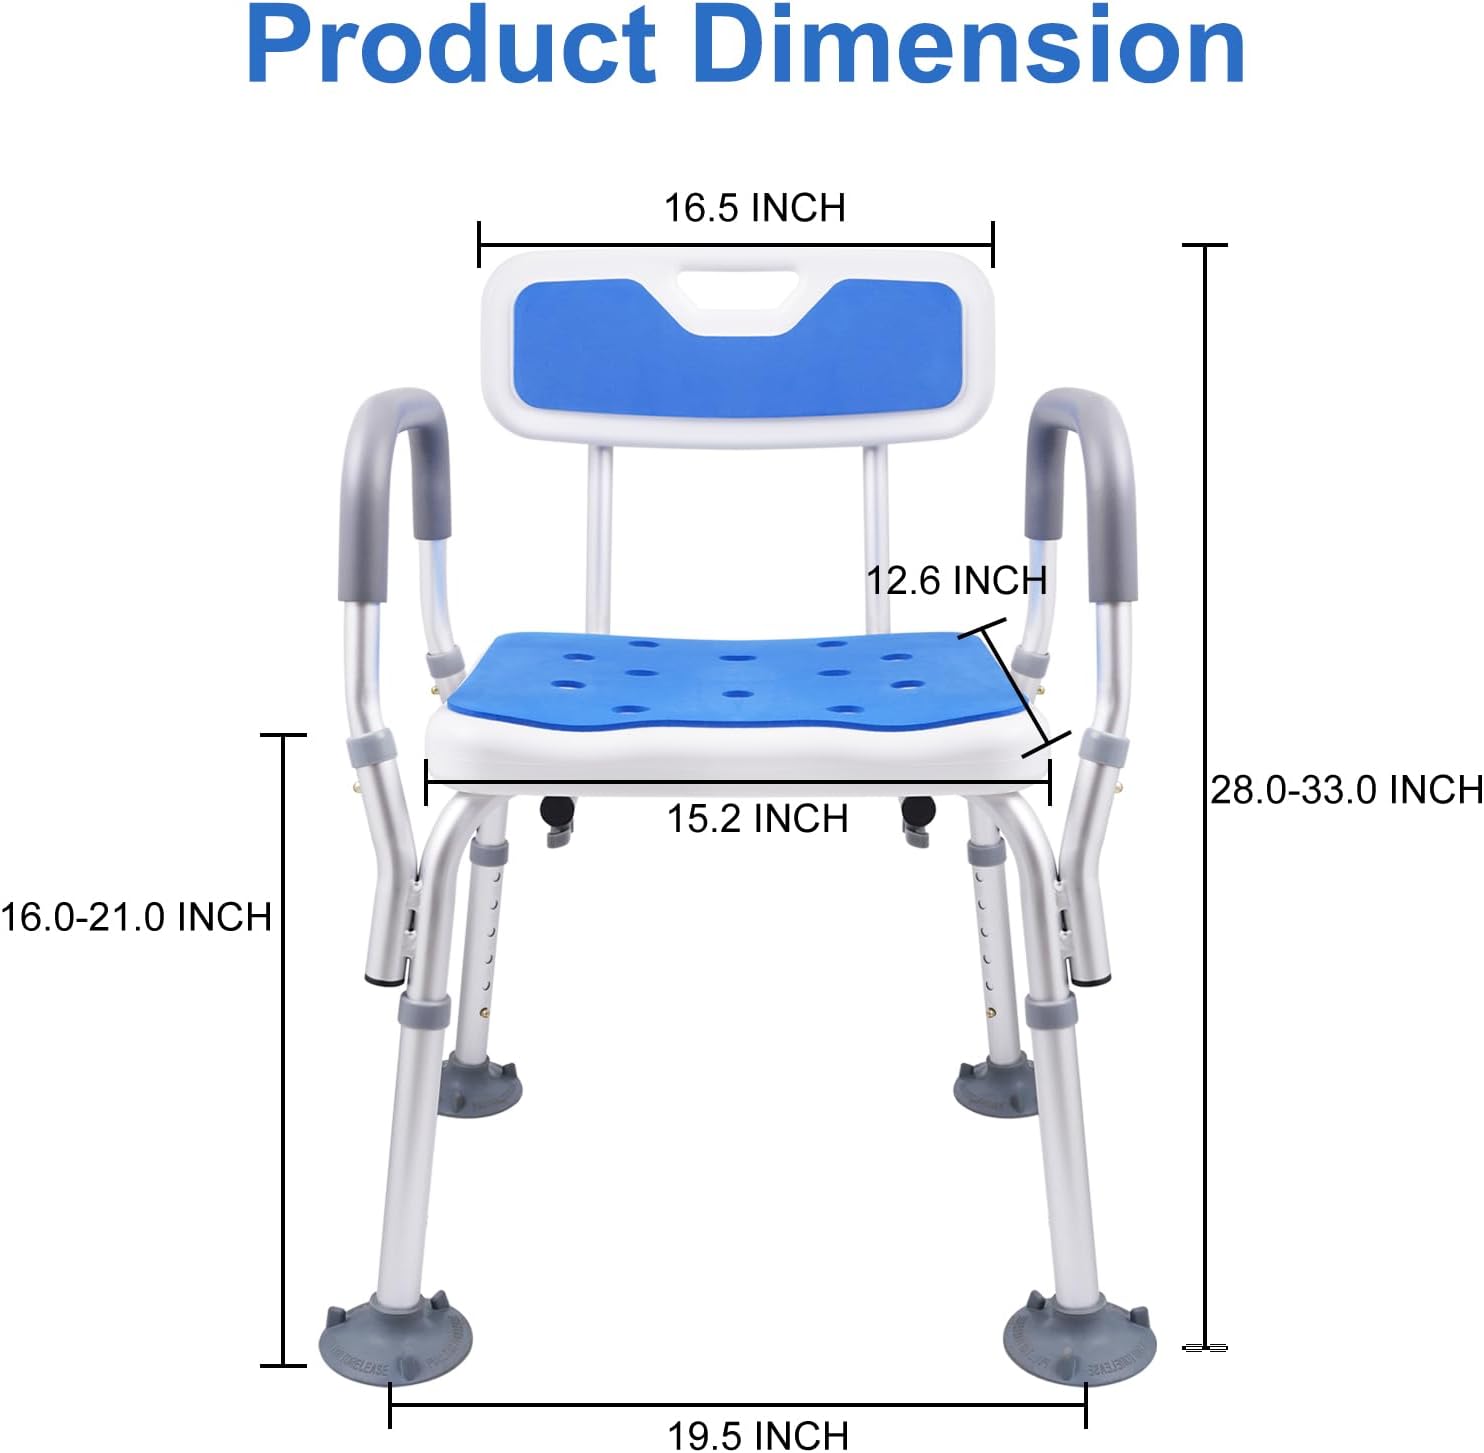 Adjustable Height Shower Chair-Hotodeal Height Shower Seat with Armrests and Backrest